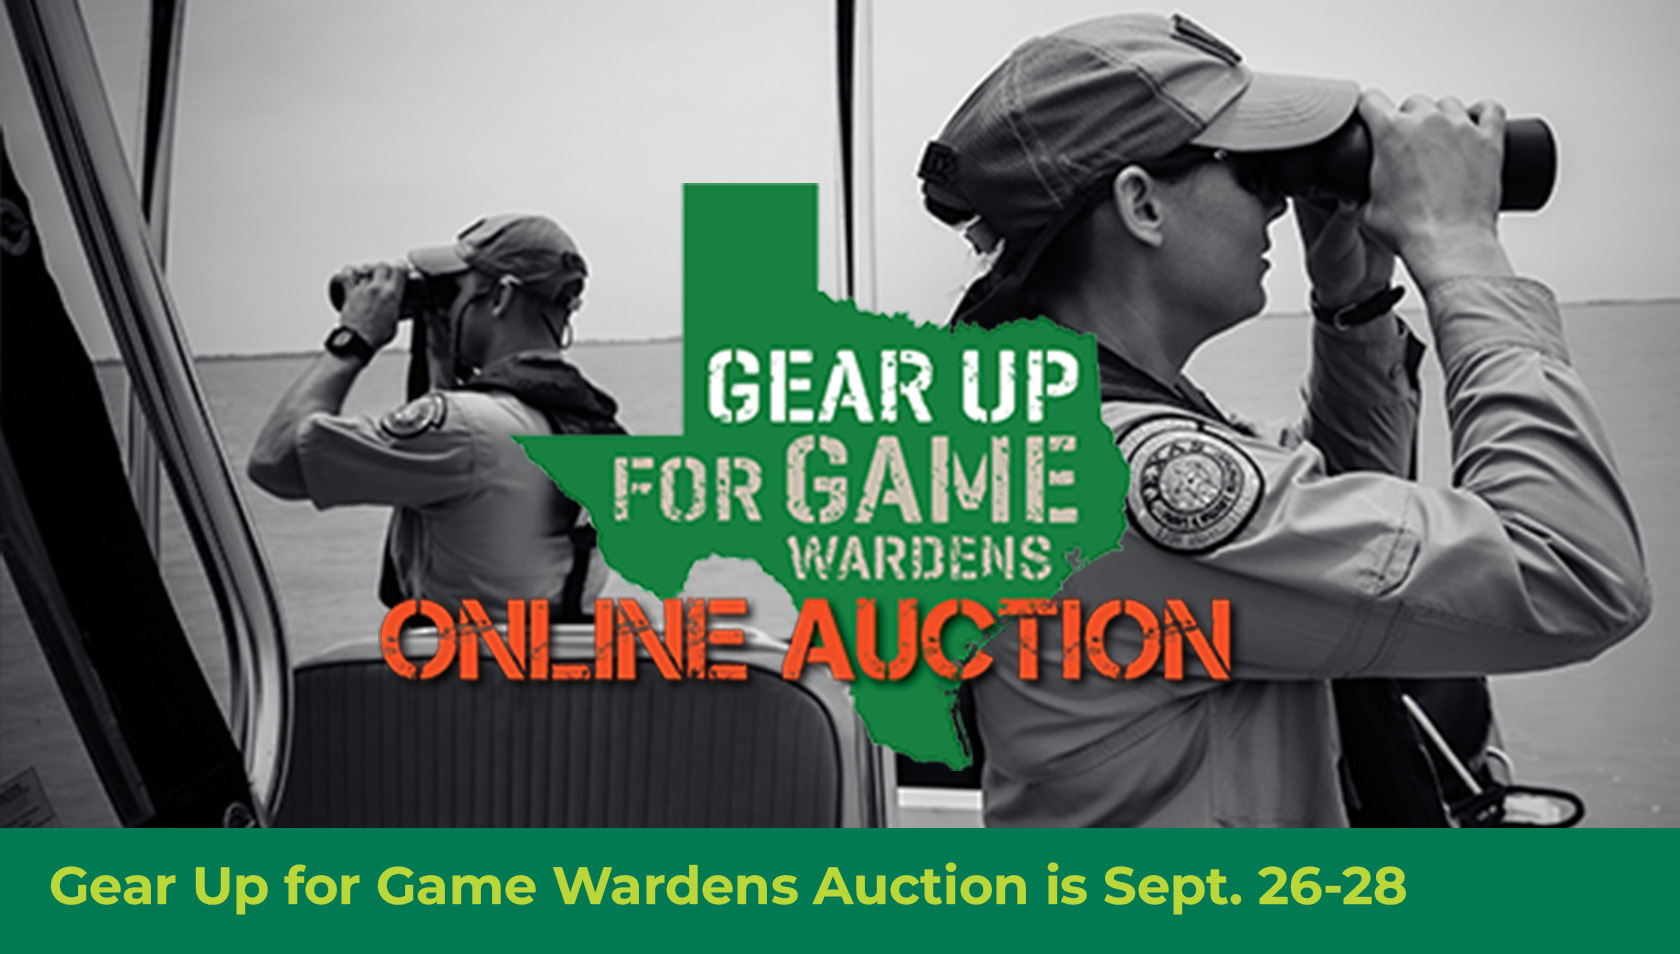 Story #5: Gear Up for Game Wardens Auction is Sept. 26-28